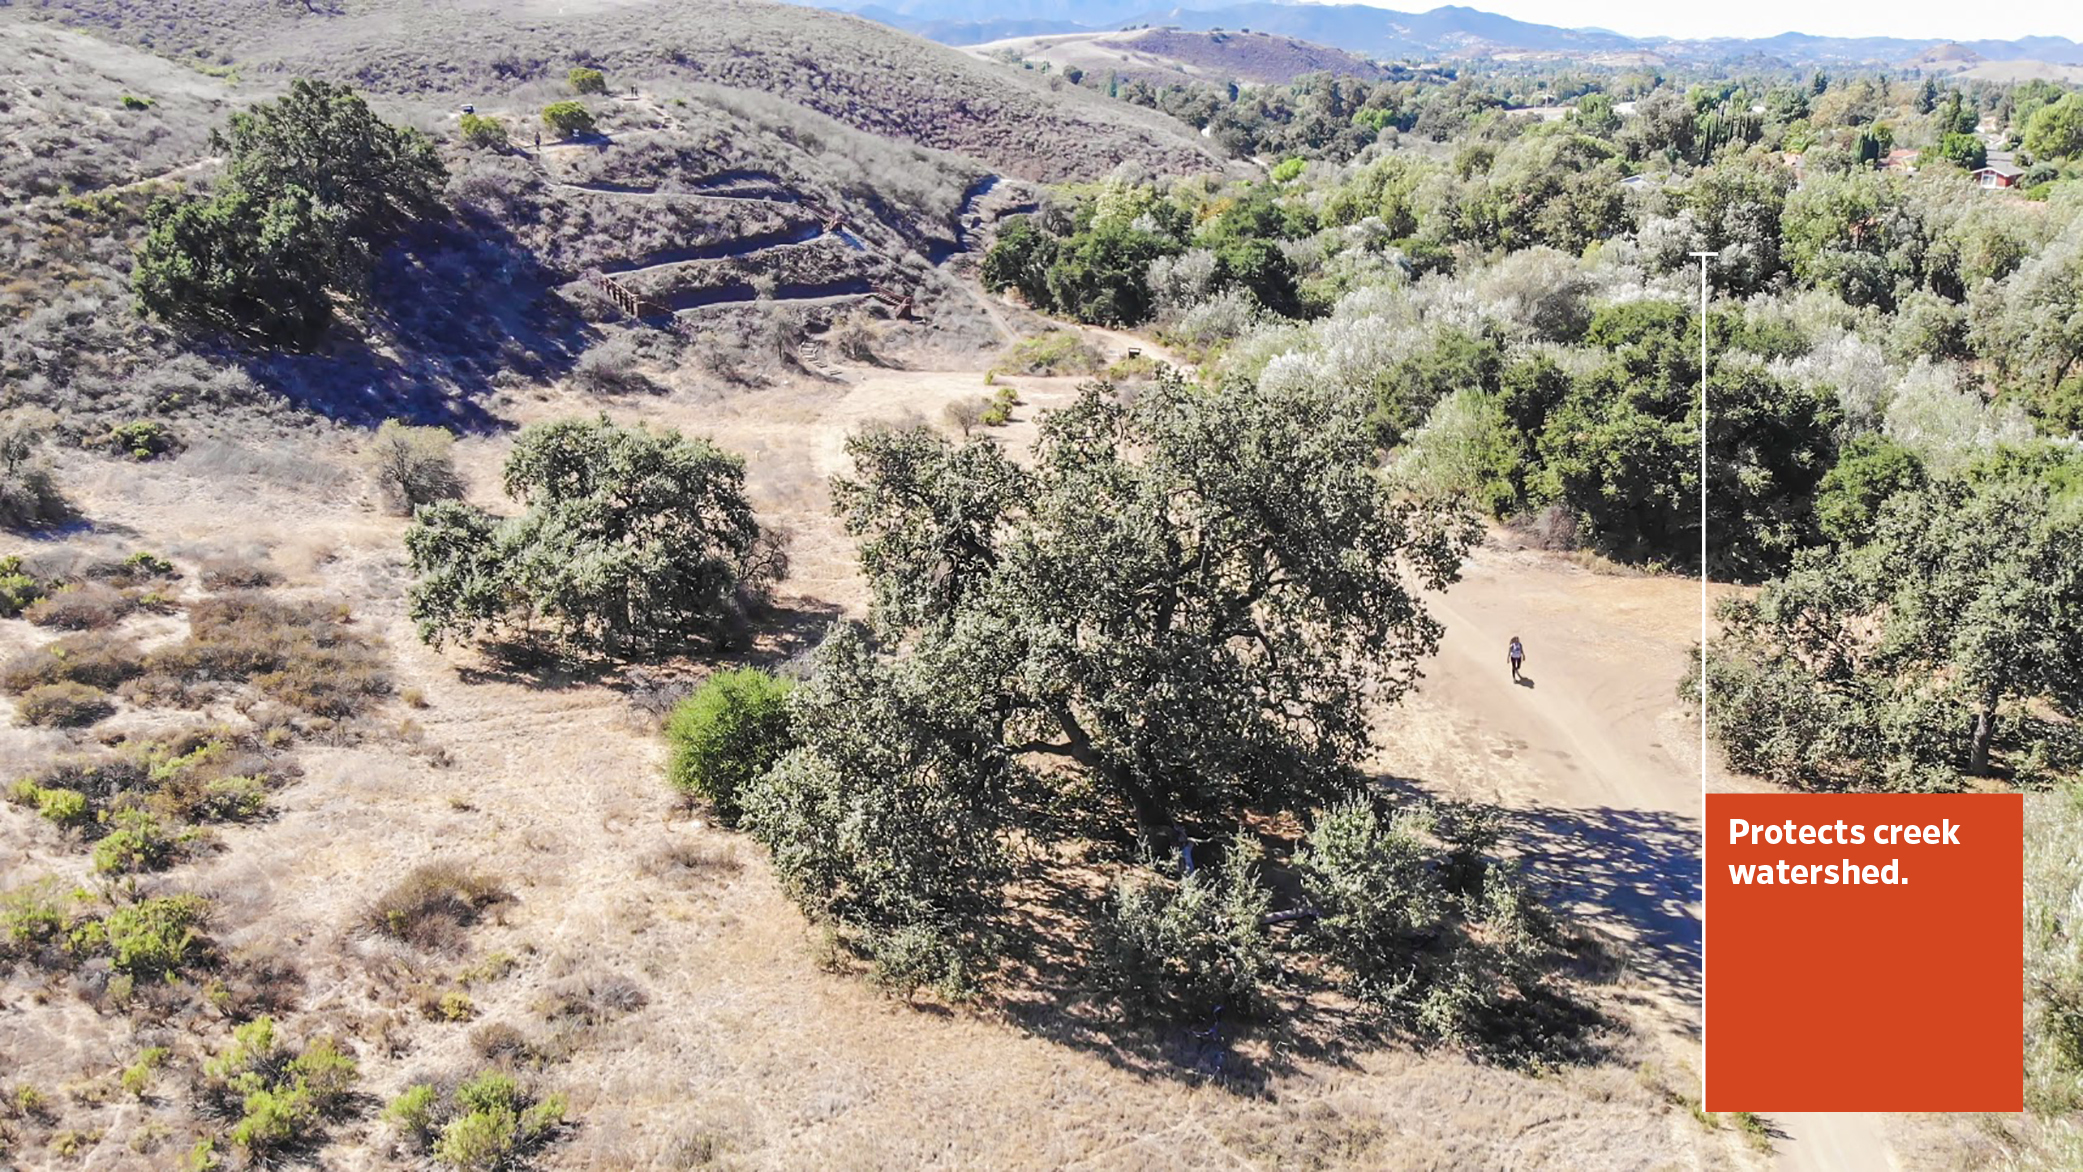 The Sapwi Trails Community Park preserves the beautiful native landscape of Calfornia, seen here, including native oak trees and other shrubs and plants.